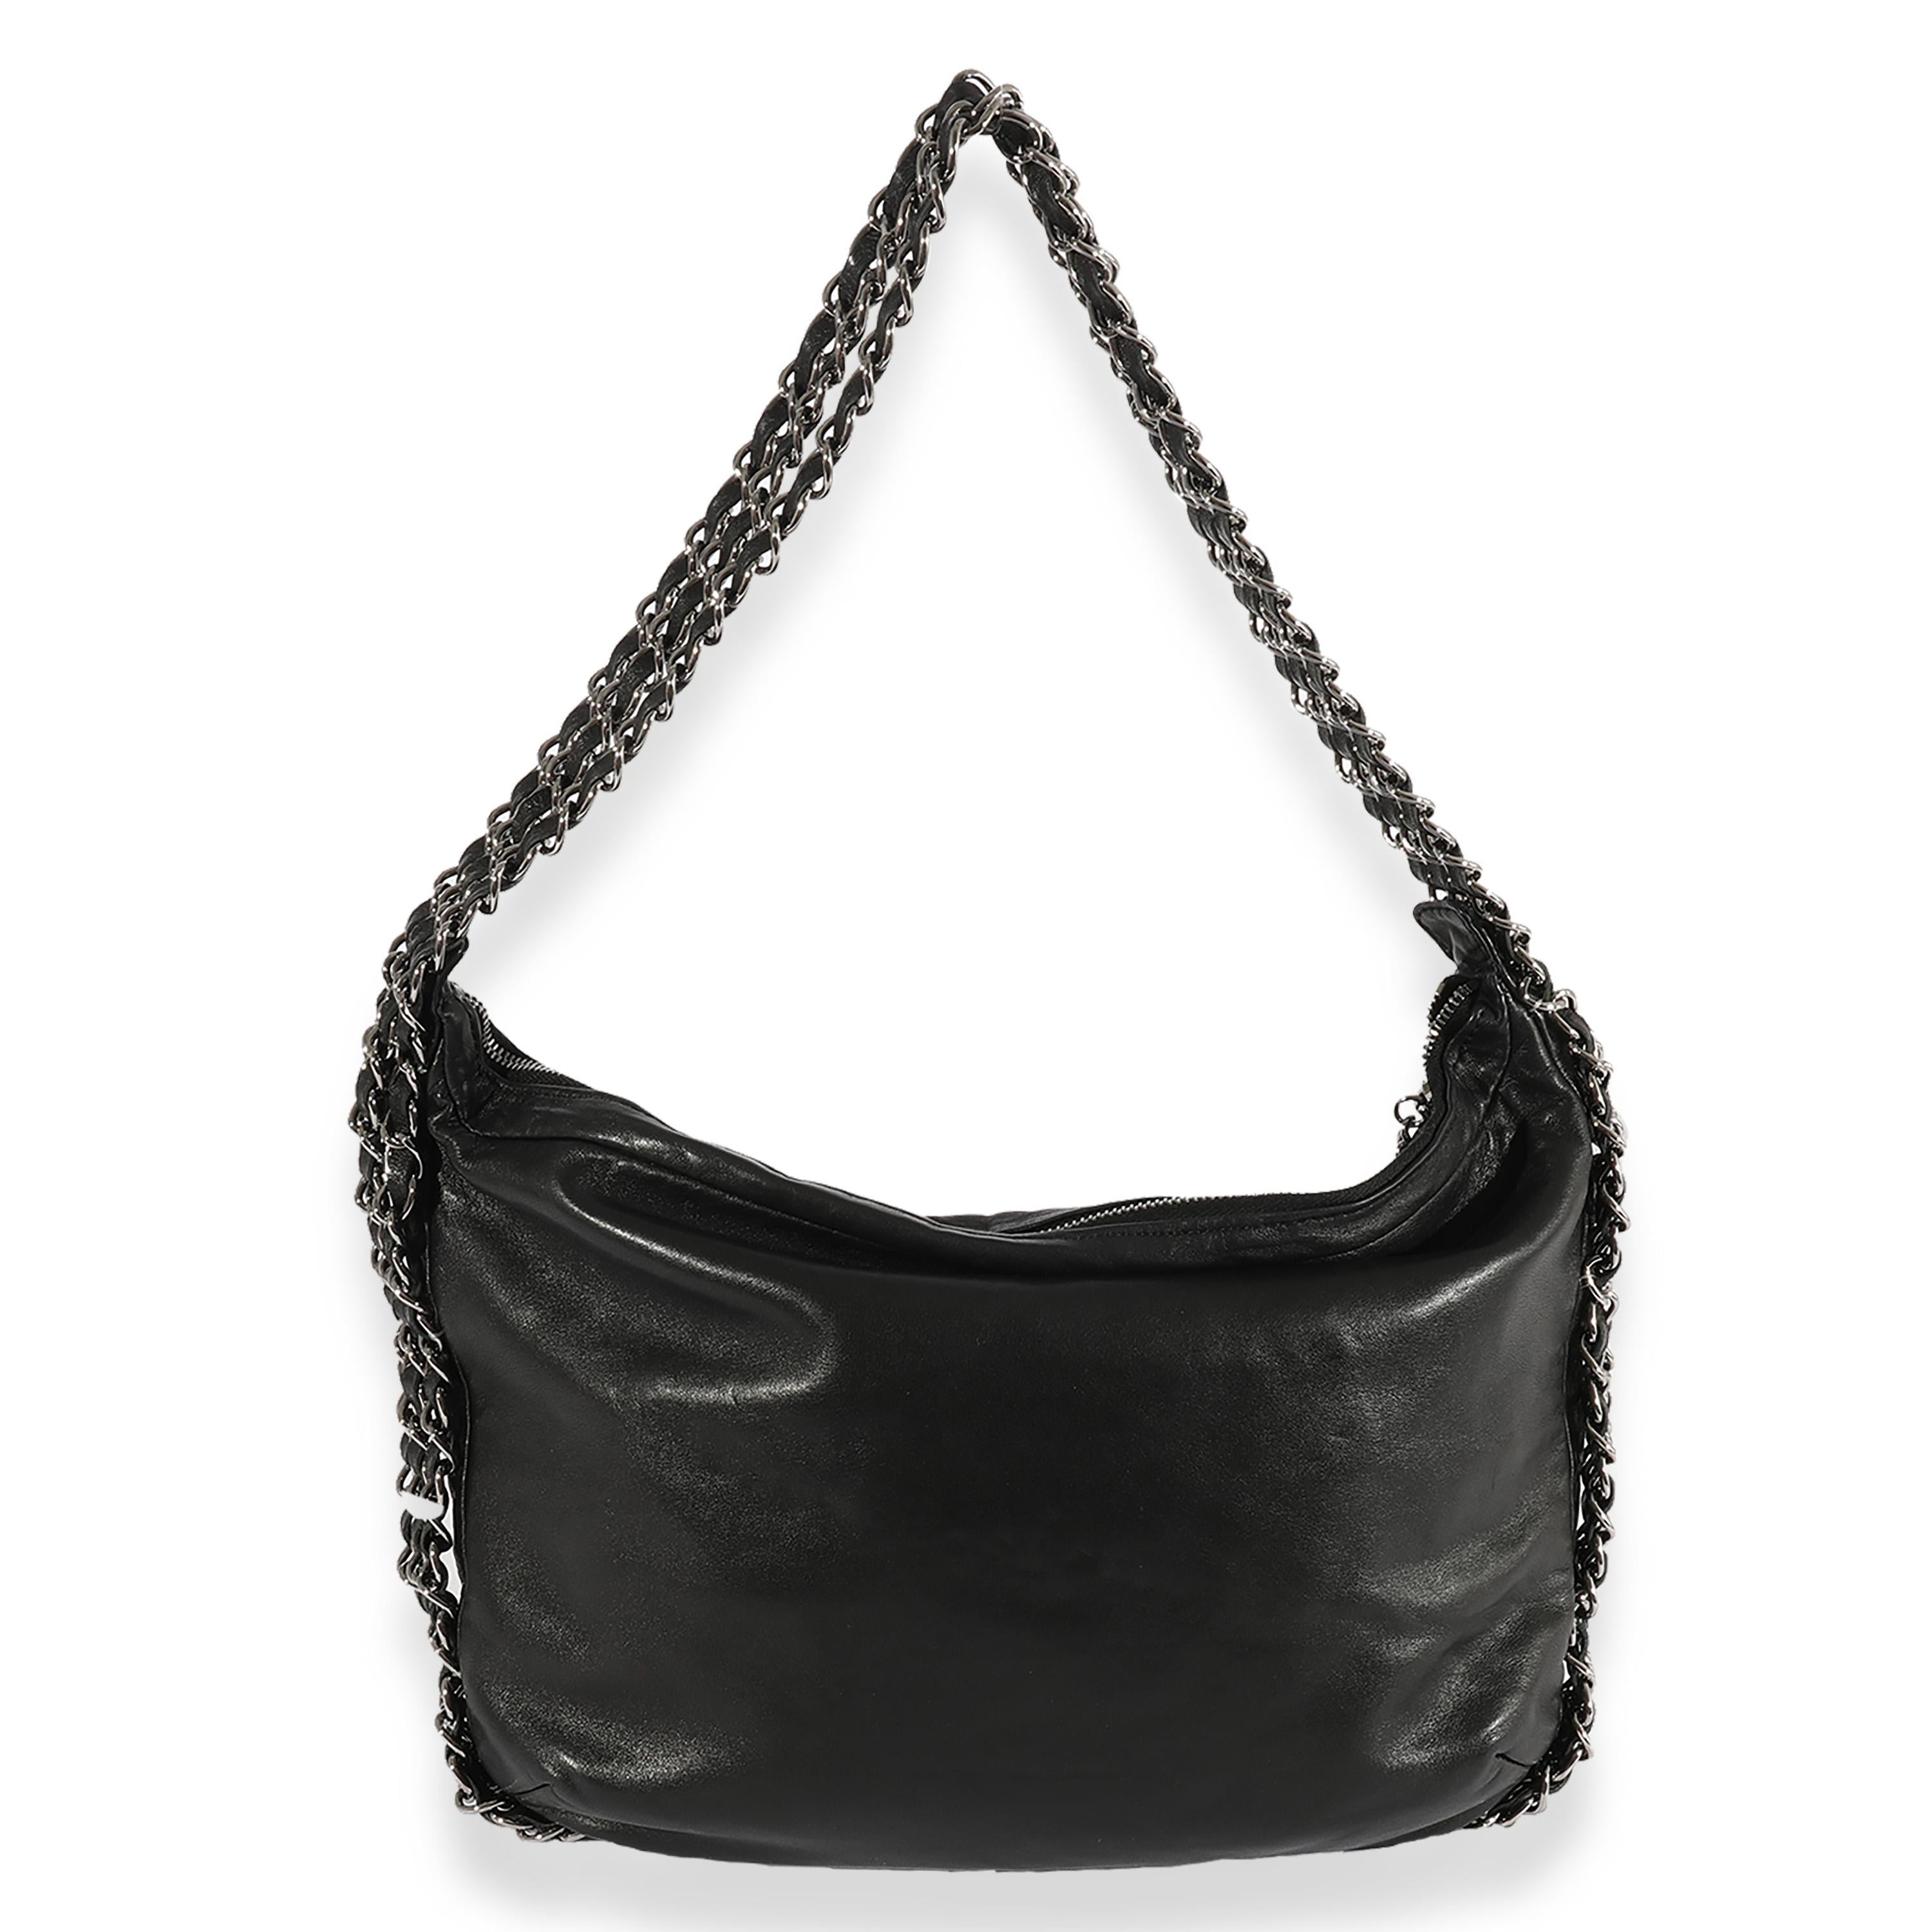 Listing Title: Chanel Black Lambskin Triple Chain Hobo
SKU: 123535
Condition: Pre-owned 
Handbag Condition: Very Good
Condition Comments: Very Good Condition. Faint scuffing throughout leather. Scratching to hardware.
Brand: Chanel
Model: Triple